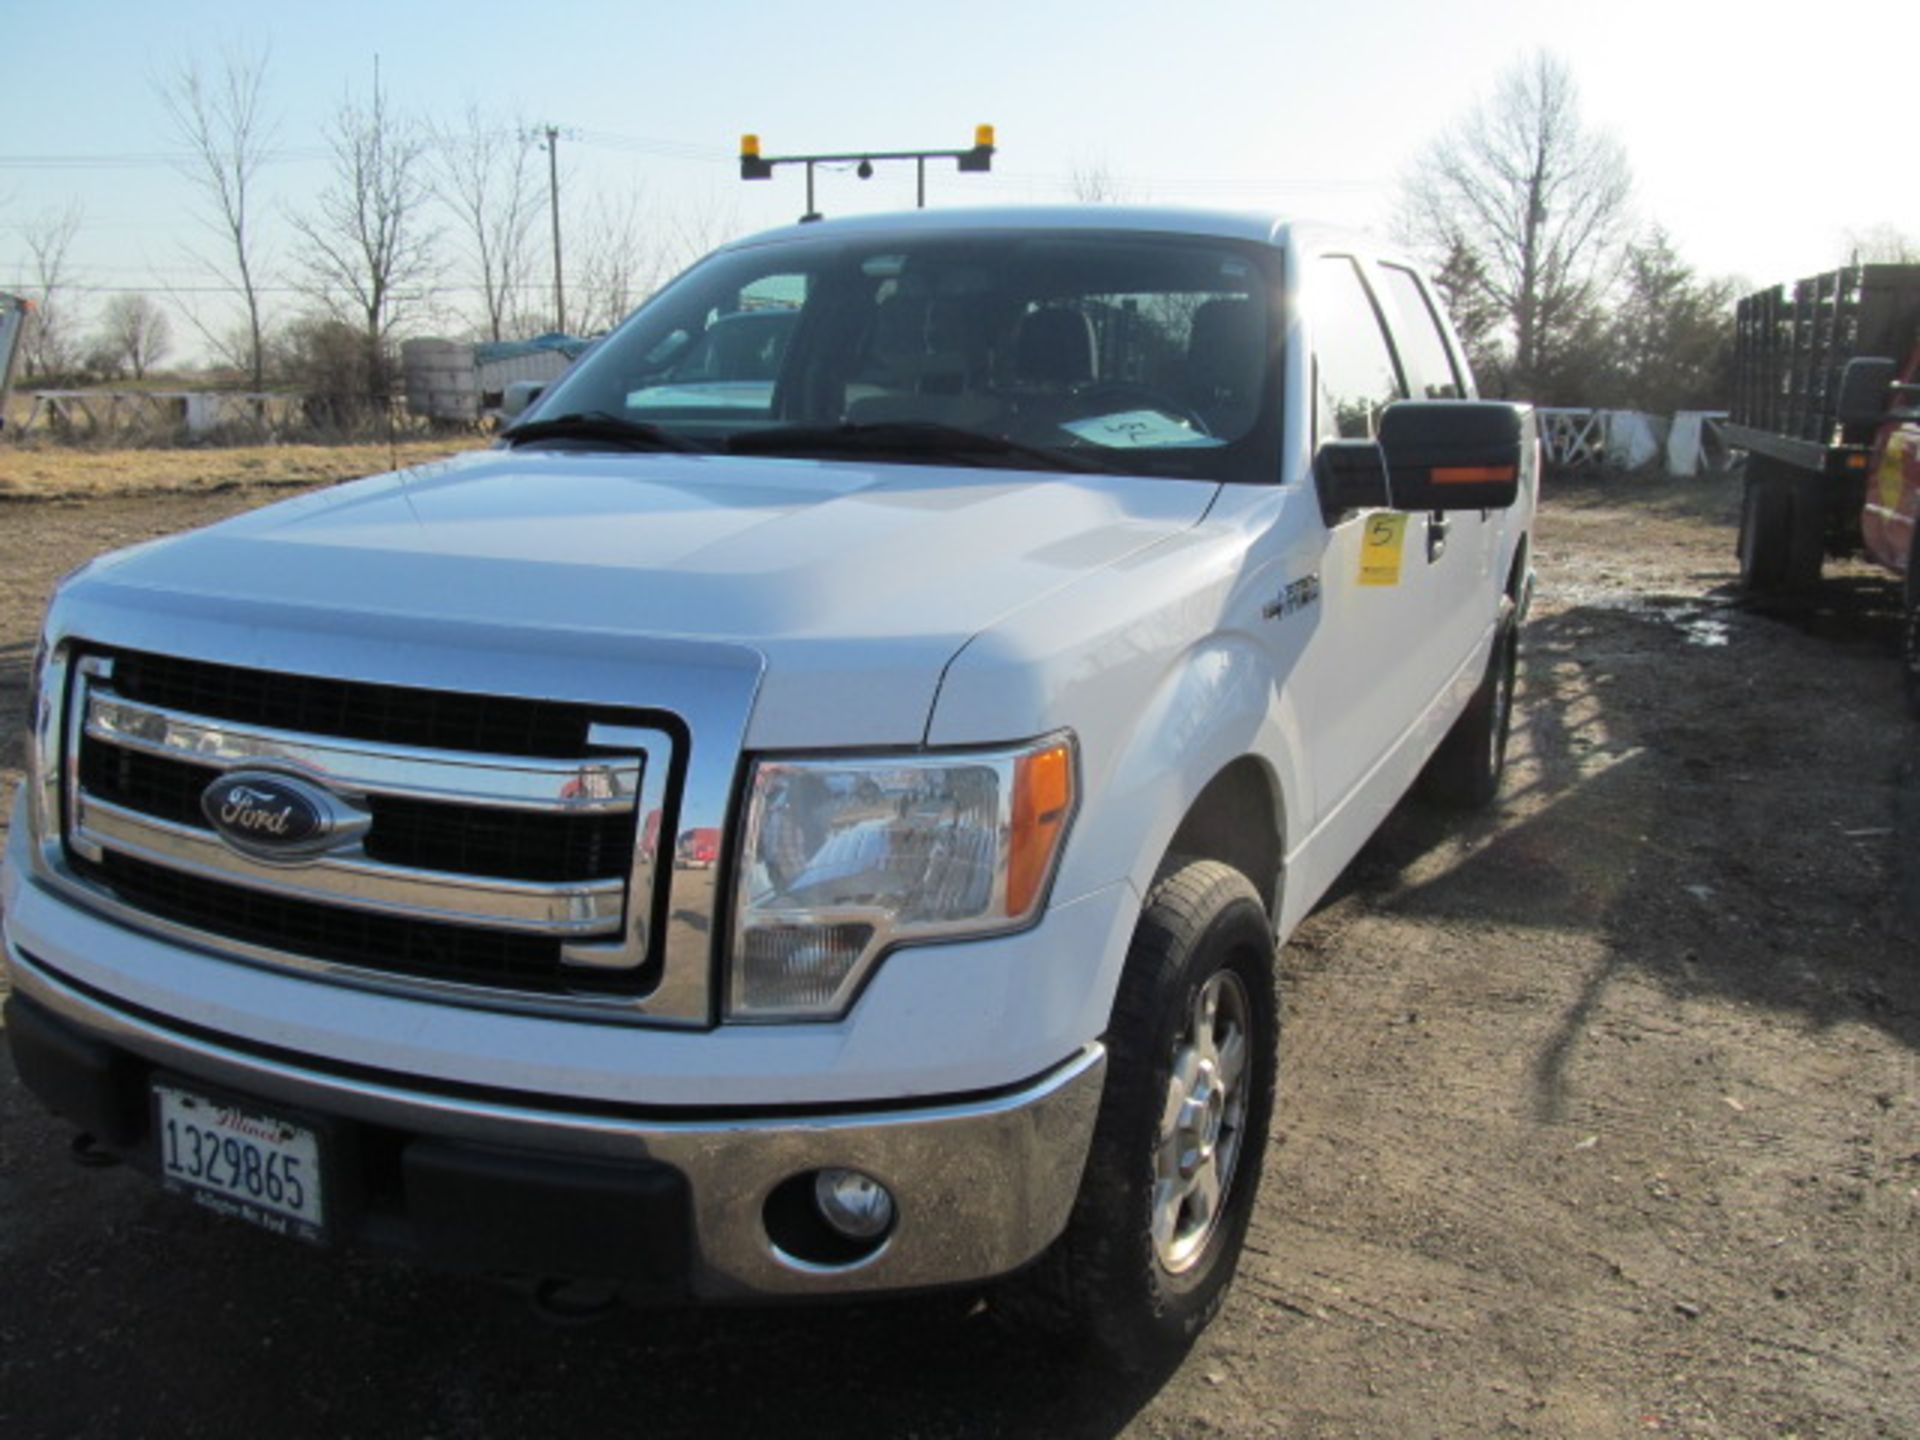 2013 Ford F150 Doublecab 4x4 Pickup Truck (VIN: 1FTFW1EF9DFO85778) [Estimated Mileage: 135243.0] ( - Image 2 of 4